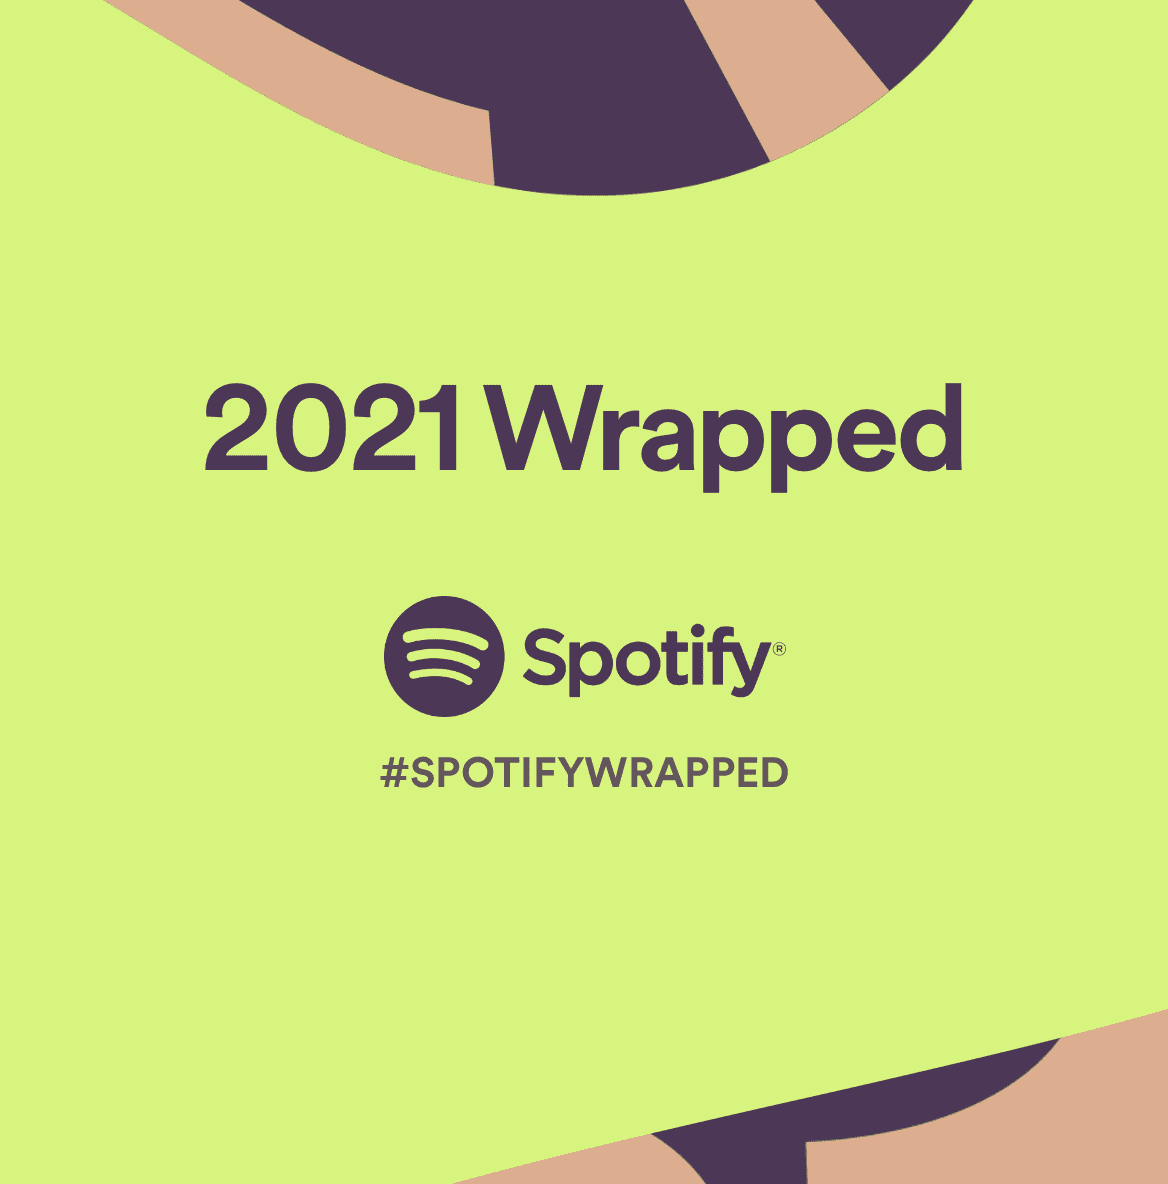 Our 2021 Music Wrapped